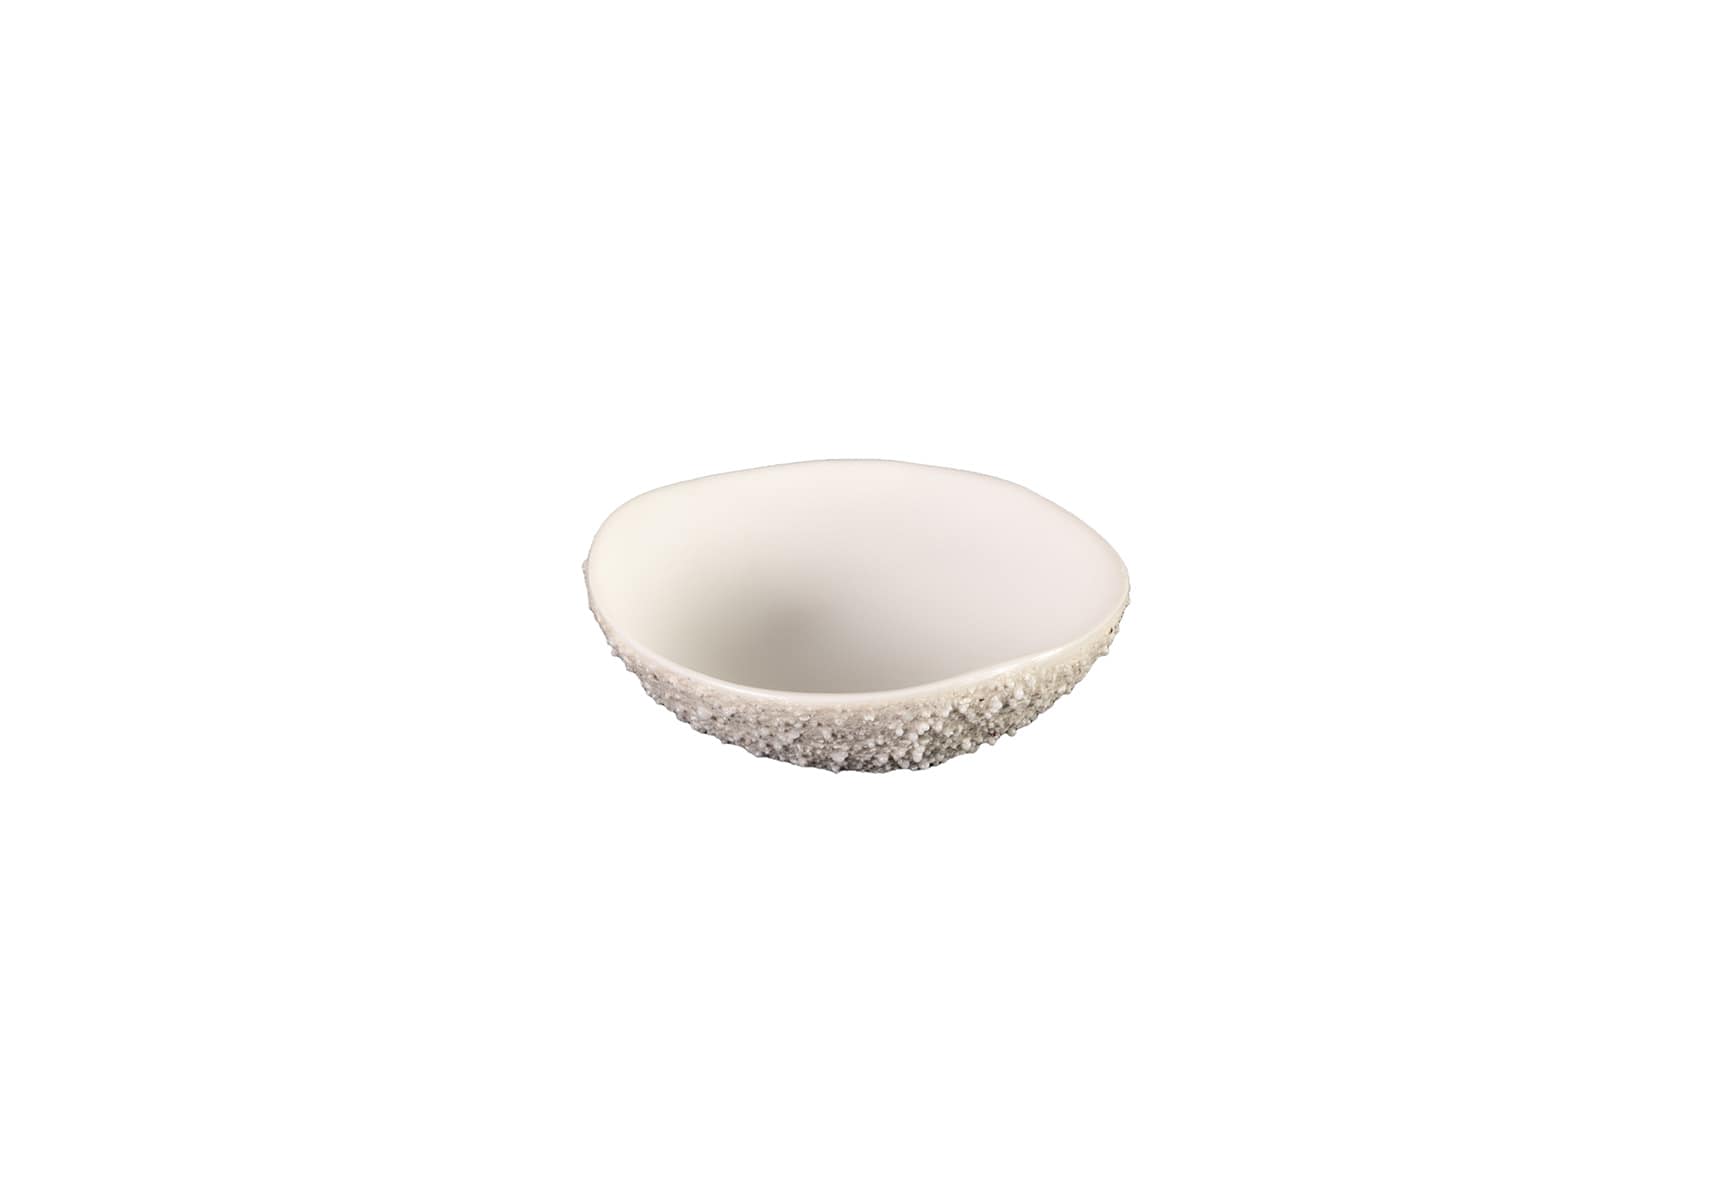 Malifance (マリファンス) - SOUP BOWL SMOOTH EDGES No.1 WHITE MAT